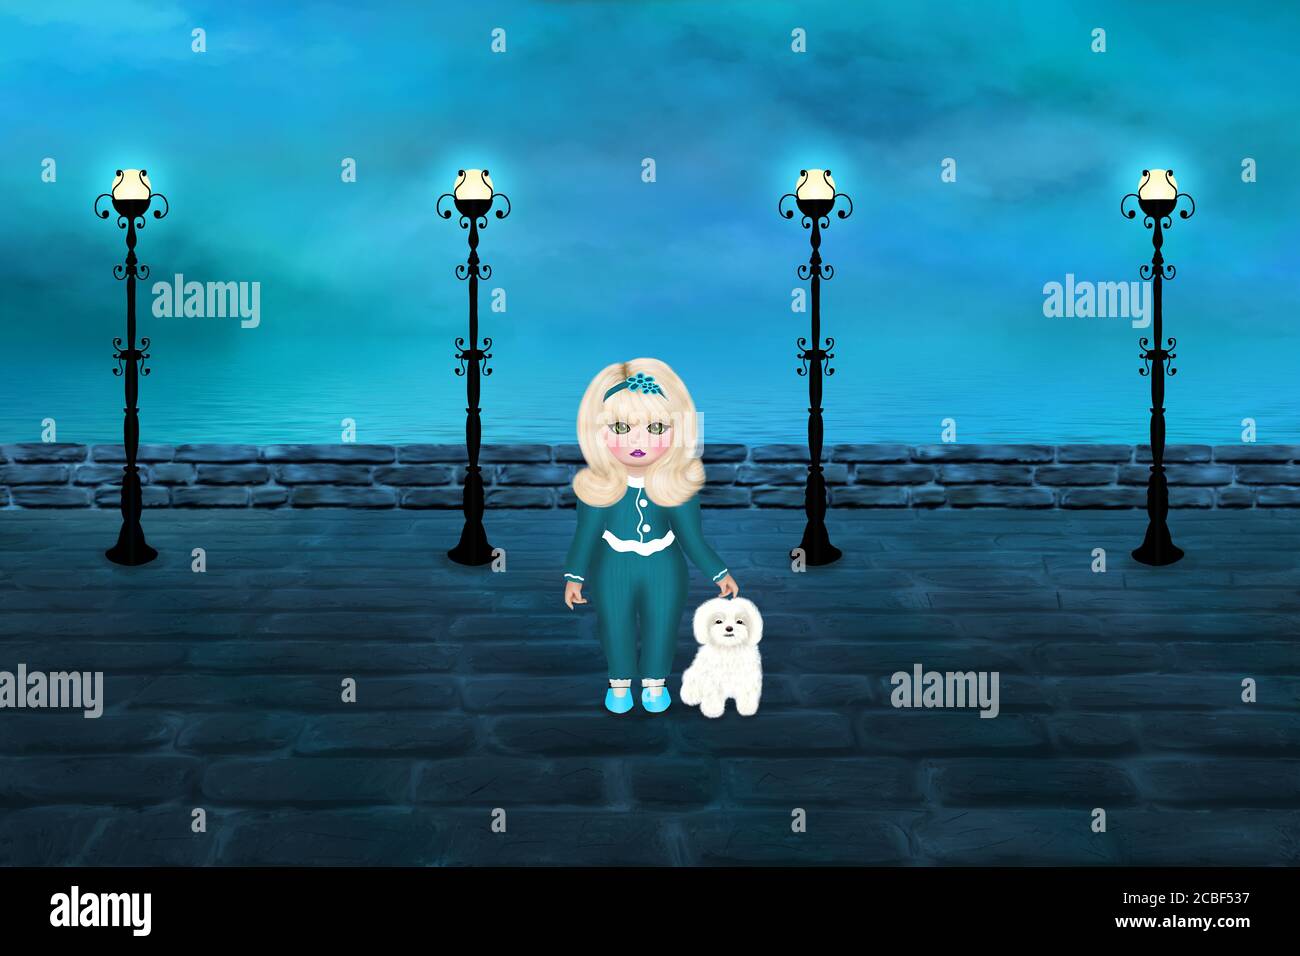 Blonde girl with a white dog on the embankment in turquoise colors. Digital artwork. Stock Photo